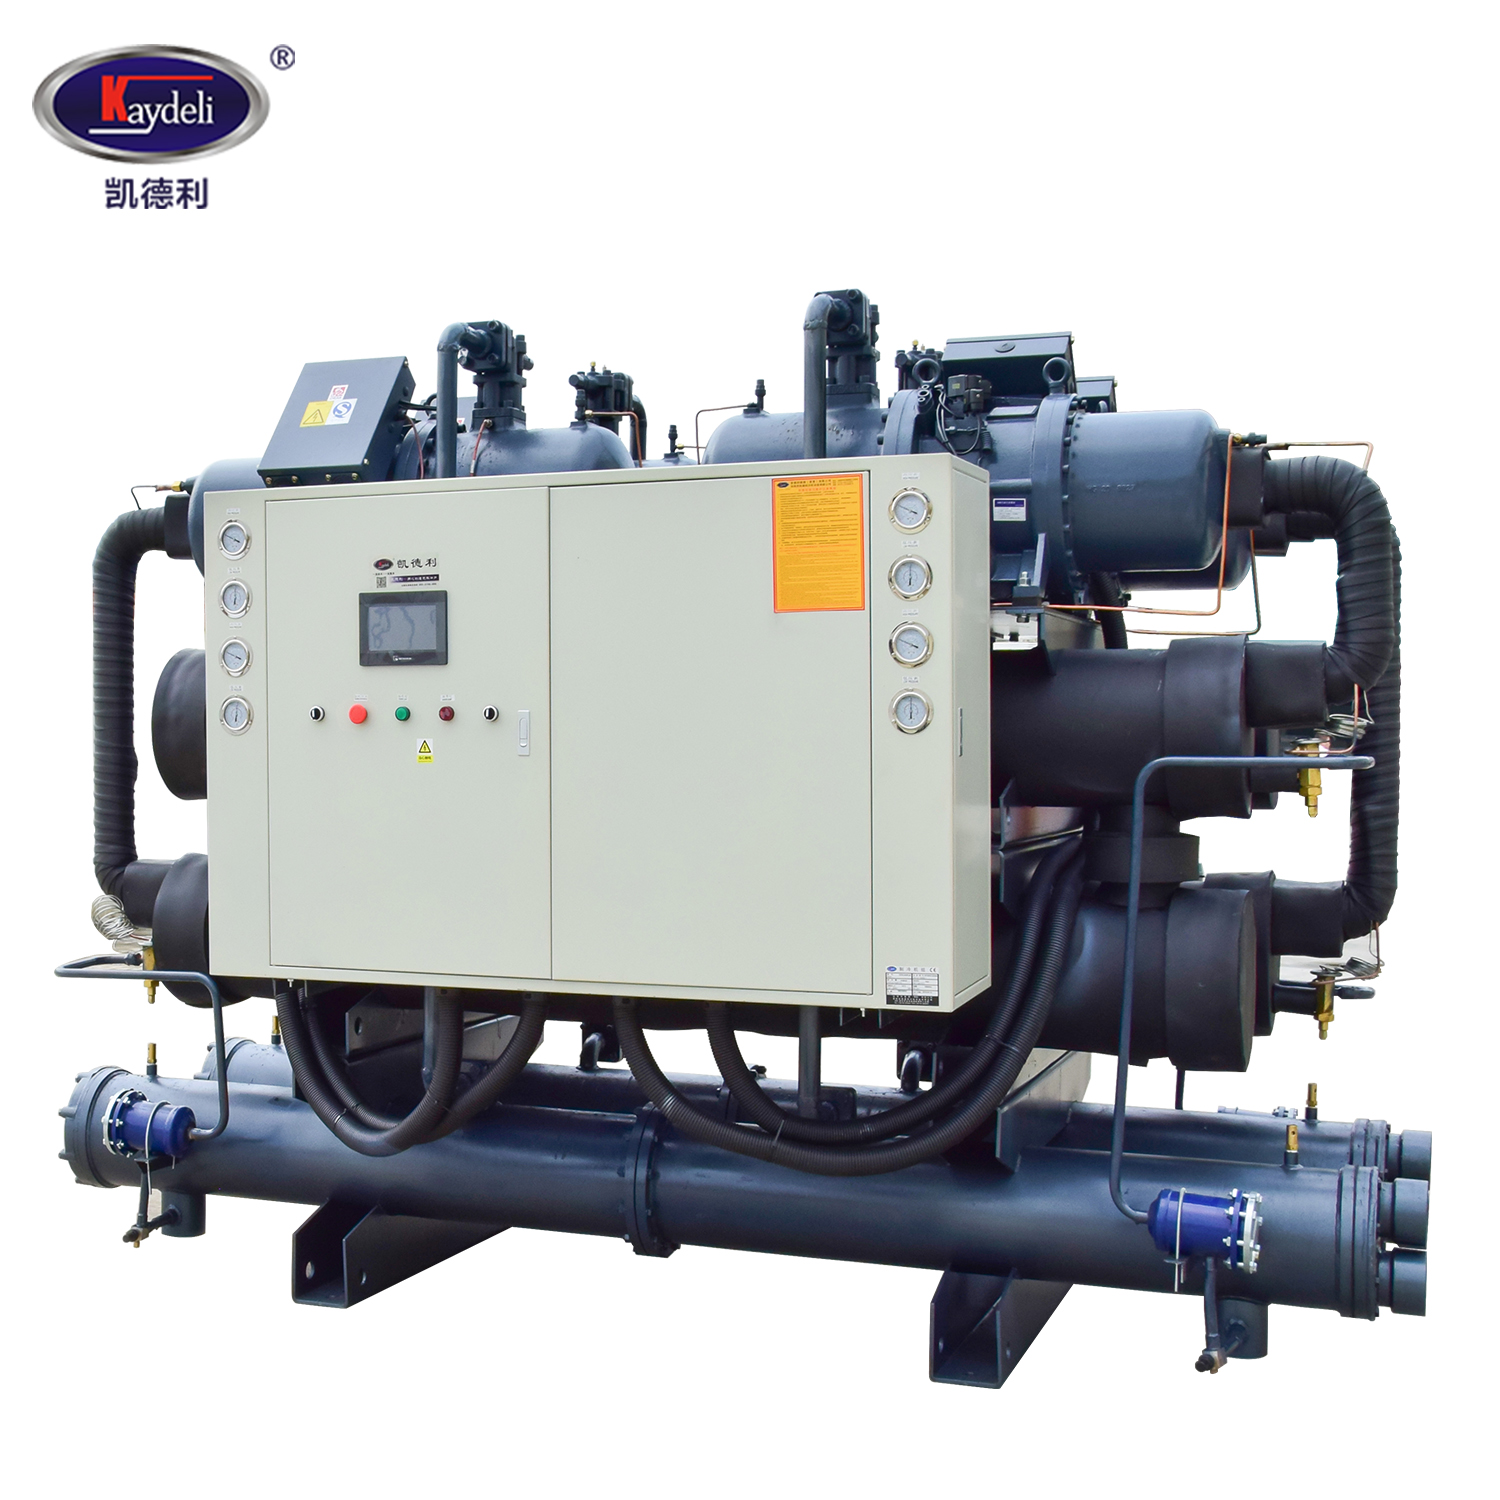 720hp 600ton 600Rt Water Cooled Screw Chiller Industrial For Hydroponics